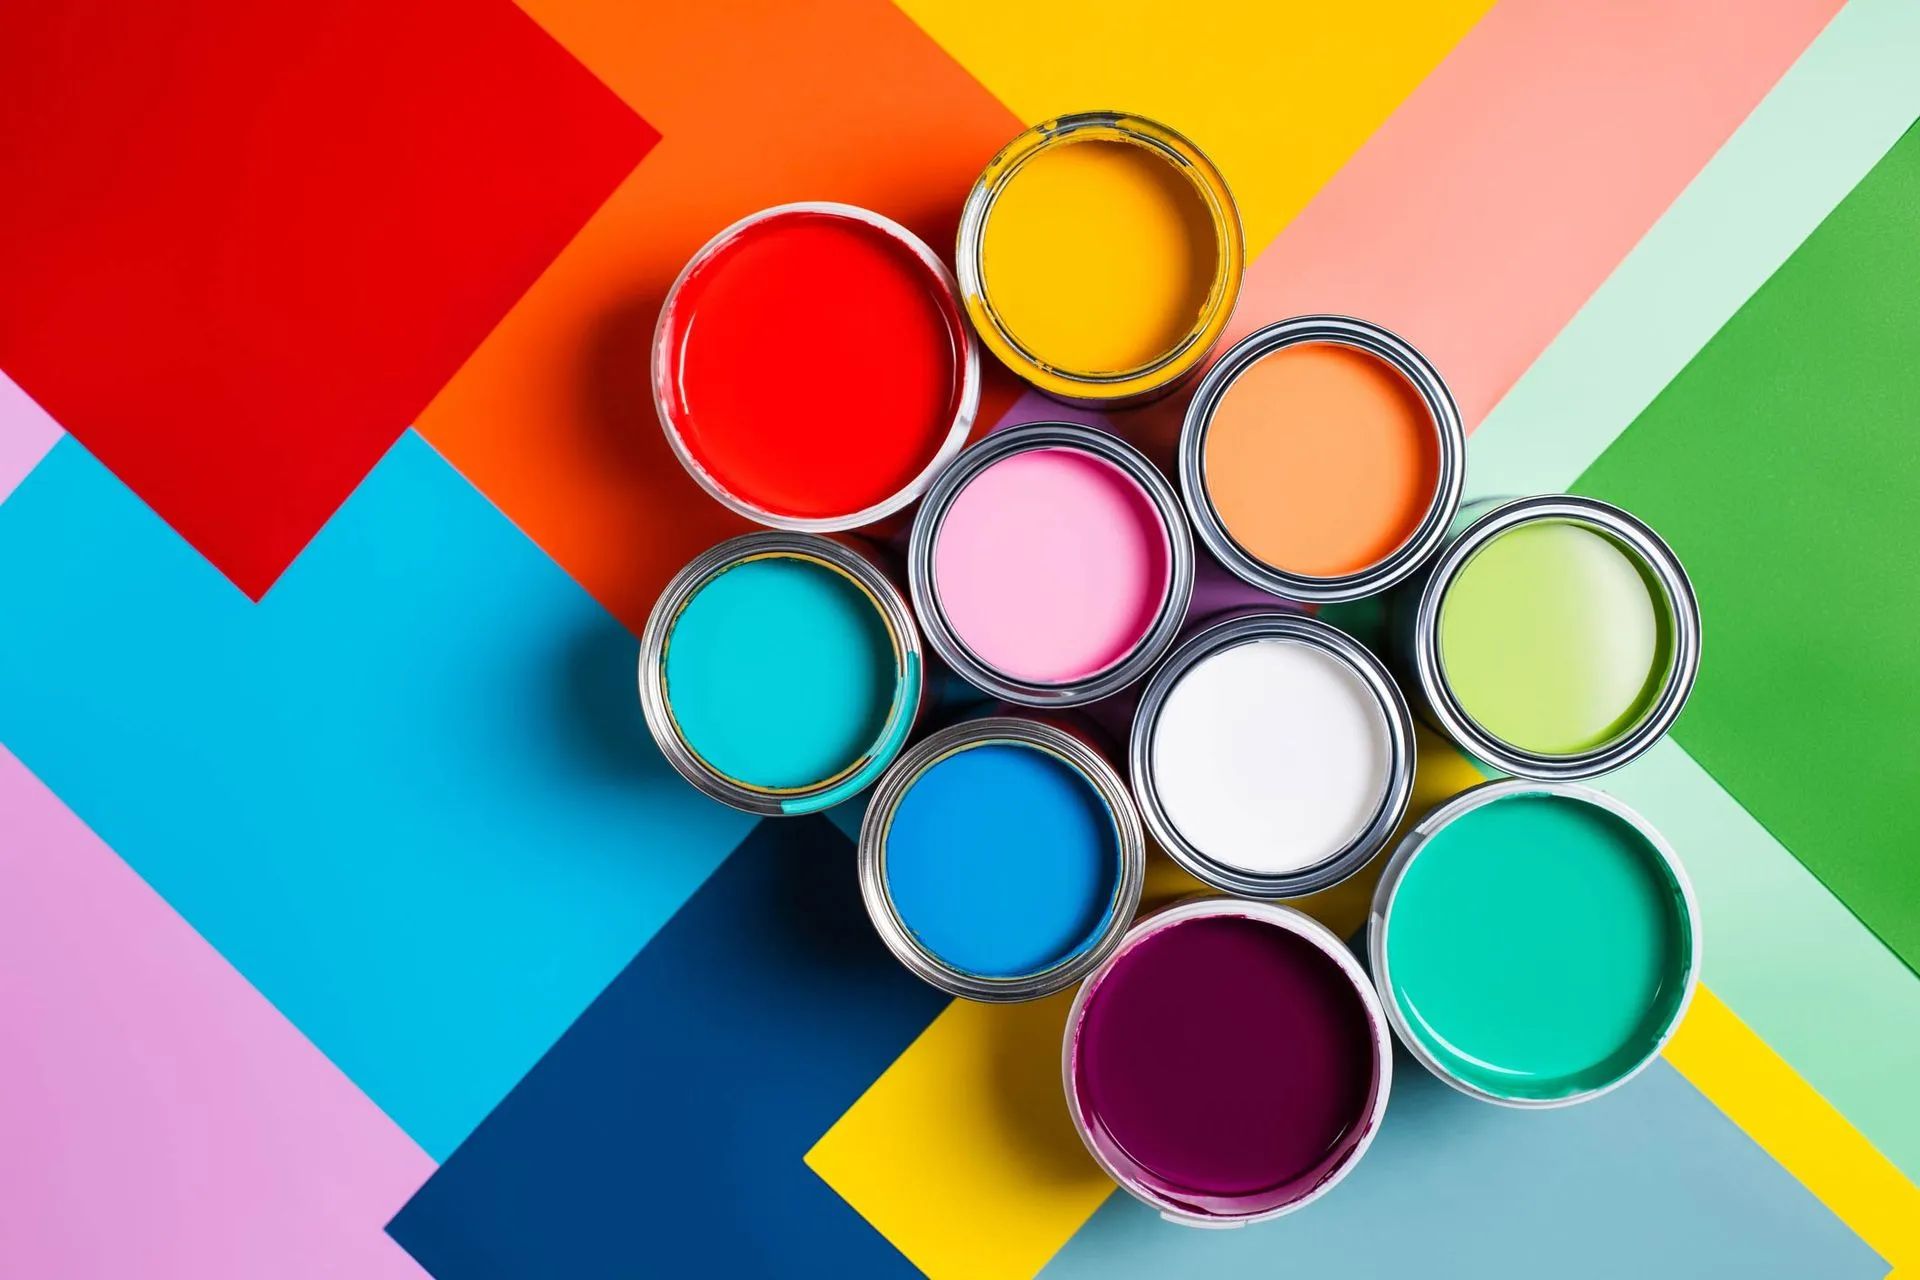 a bunch of cans of paint are stacked on top of each other on a colorful background